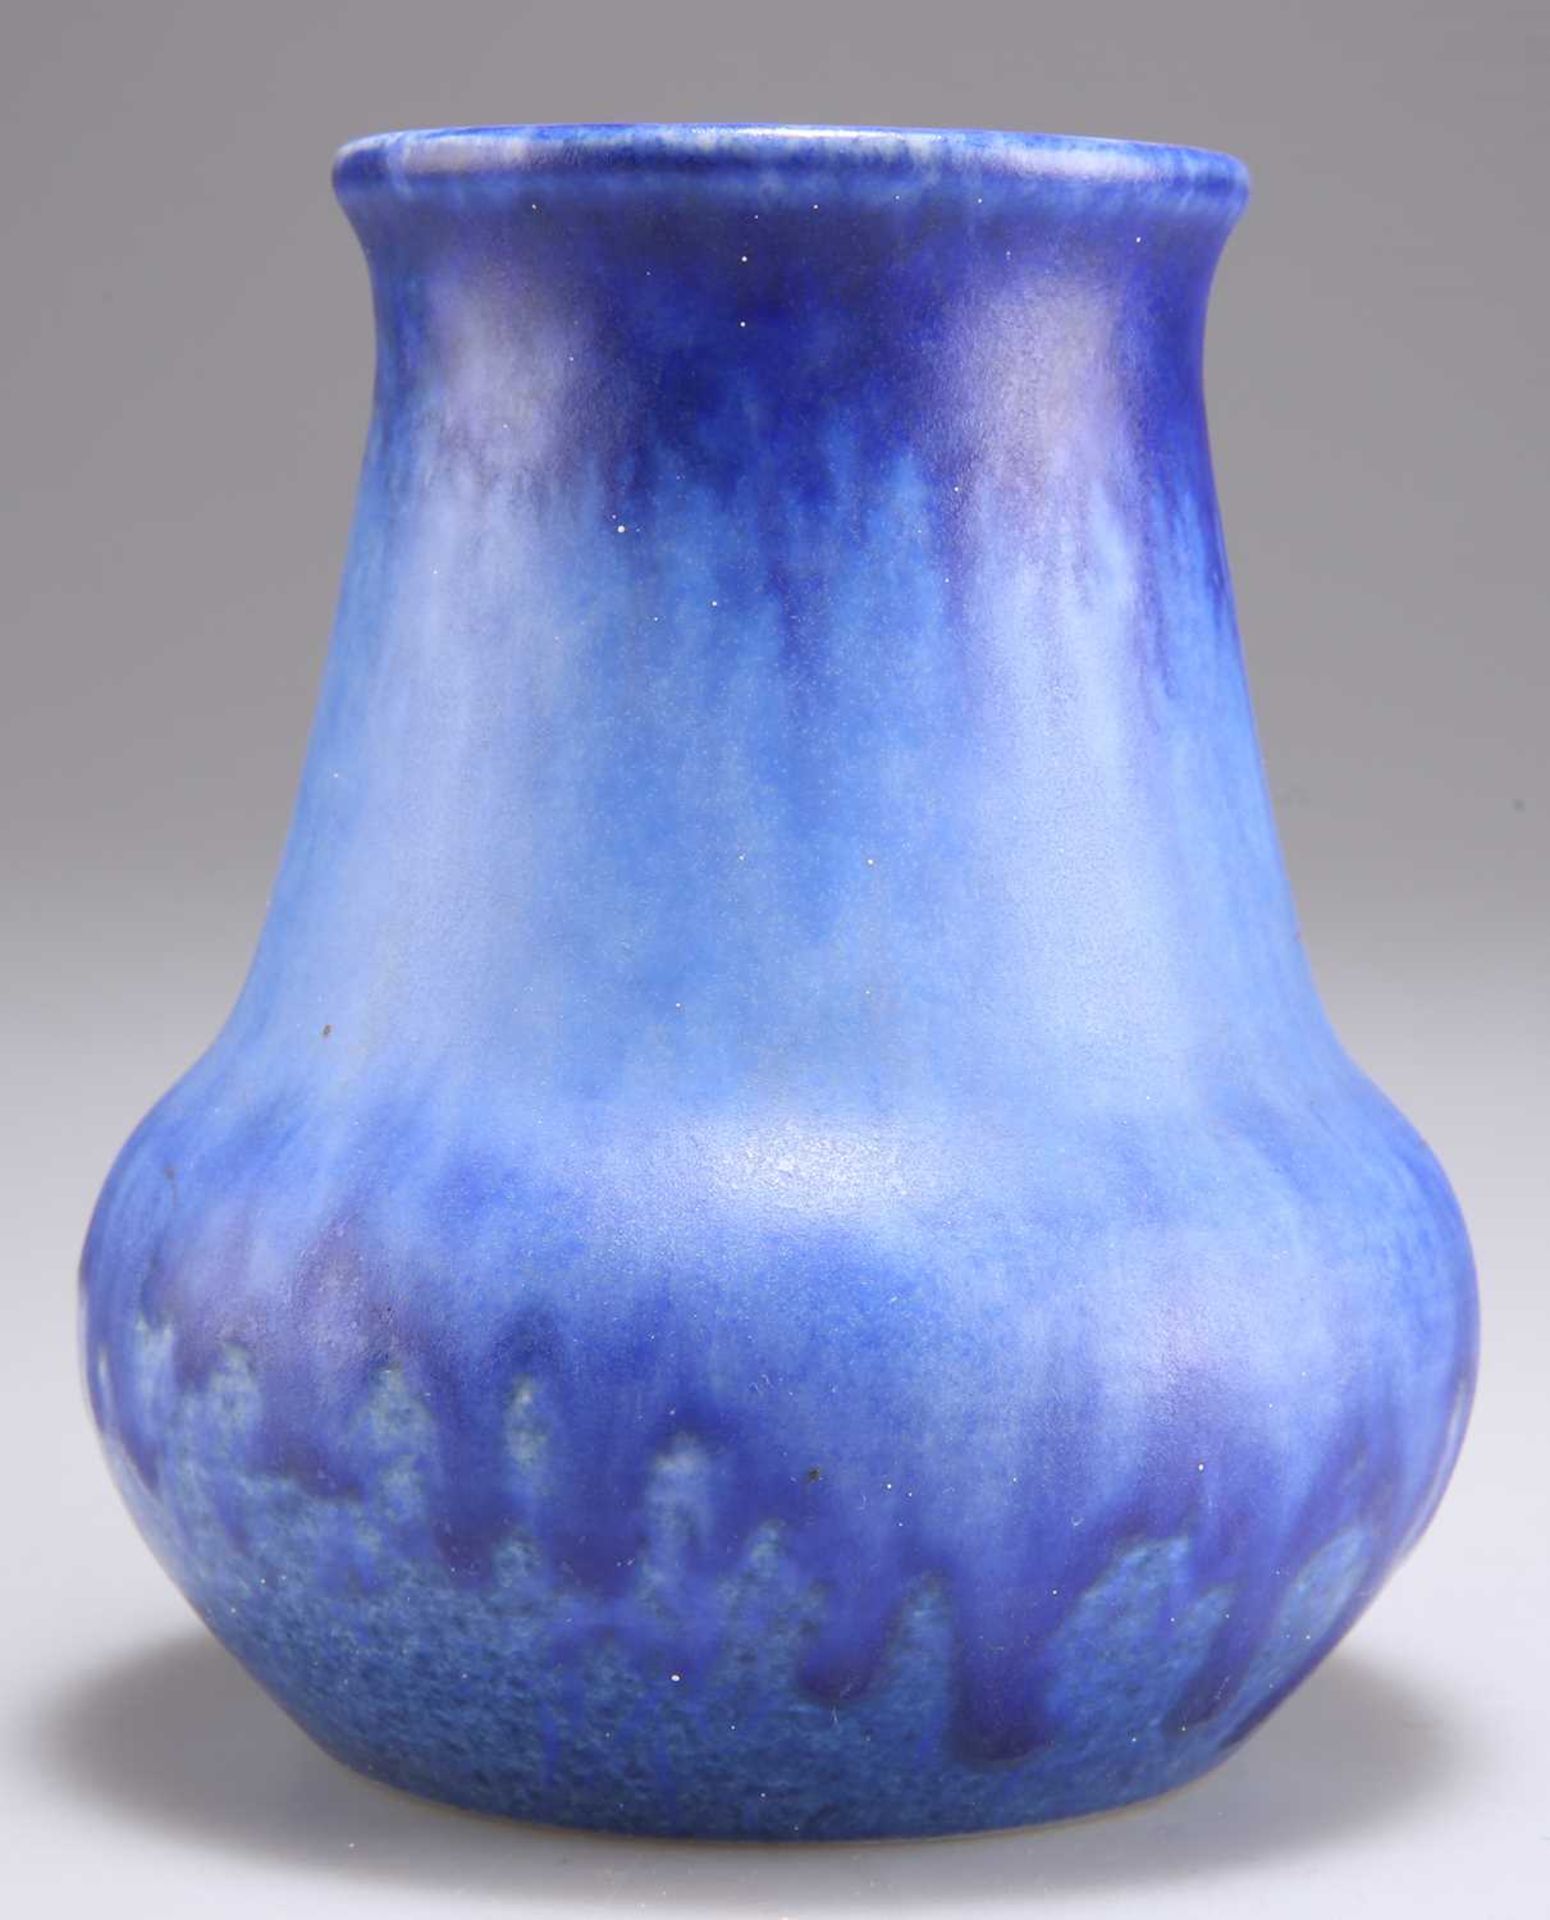 WILLIAM HOWSON TAYLOR FOR RUSKIN POTTERY, A CRYSTALLINE VASE, CIRCA 1931